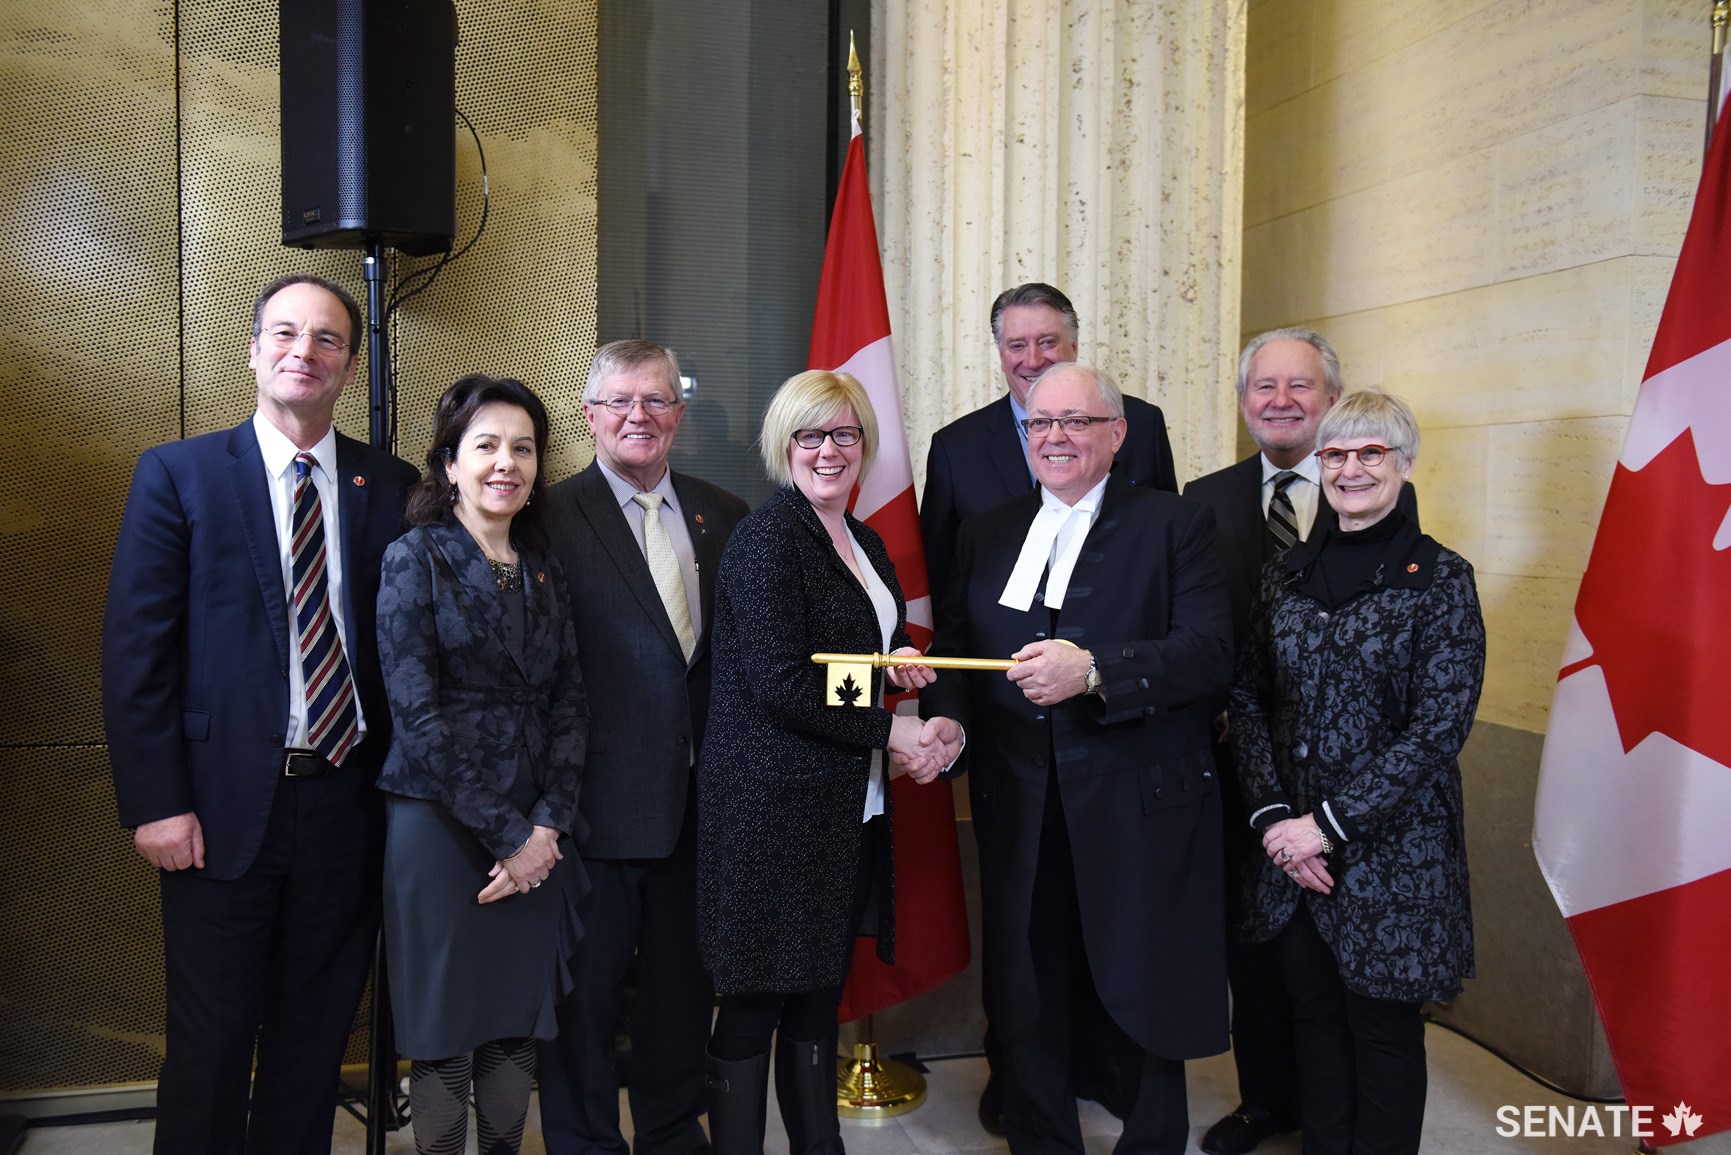 Public Services and Procurement and Accessibility Minister Carla Qualtrough presents Speaker of the Senate George J. Furey with a key to the new Senate of Canada Building, marking the official handover of the building that will be the Senate’s temporary home during the Centre Block rehabilitation. Senators Marc Gold, Raymonde Saint-Germain, Donald Plett, Scott Tannas, Peter Harder and Patricia Bovey join them for the handover.